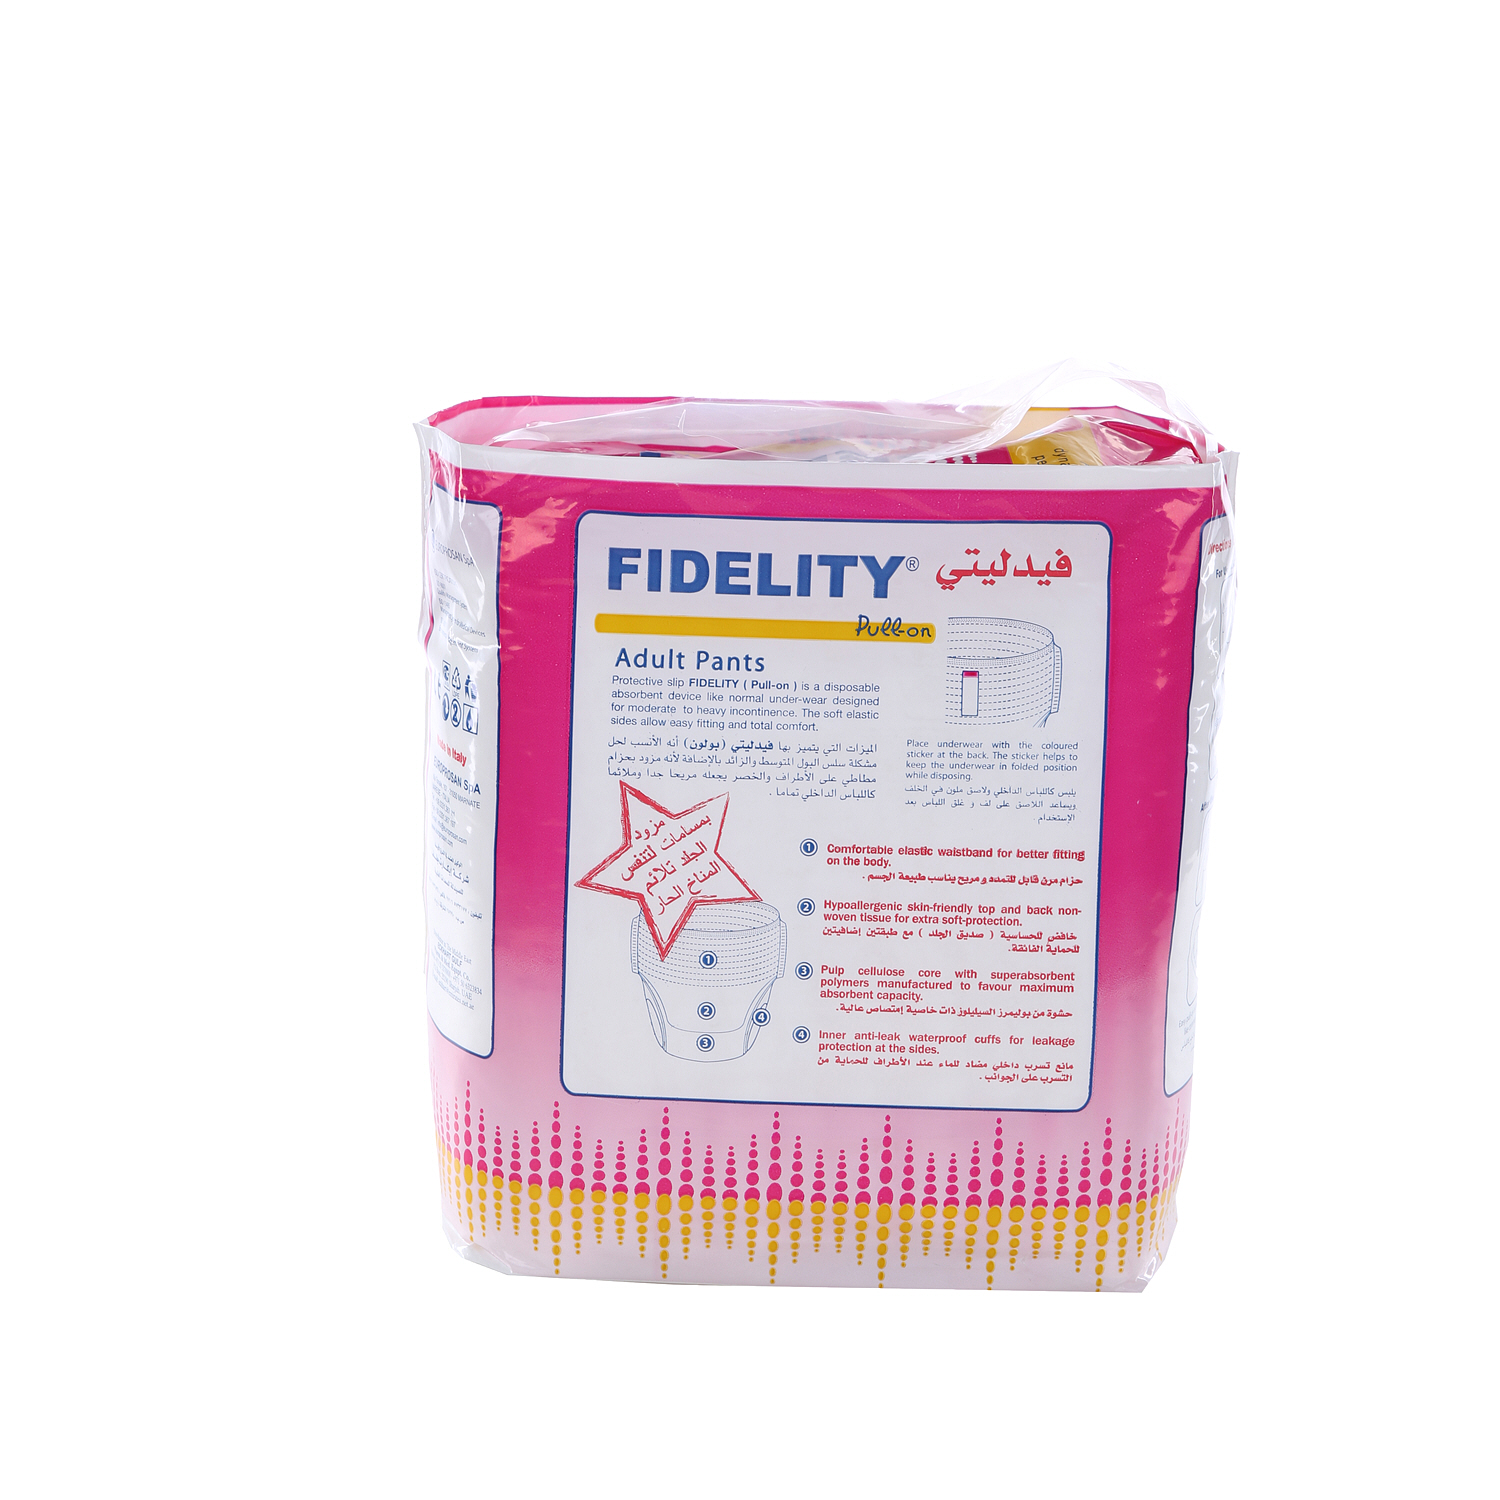 Fidelity Adult Pull On Pants Extra Large 10 Diaper